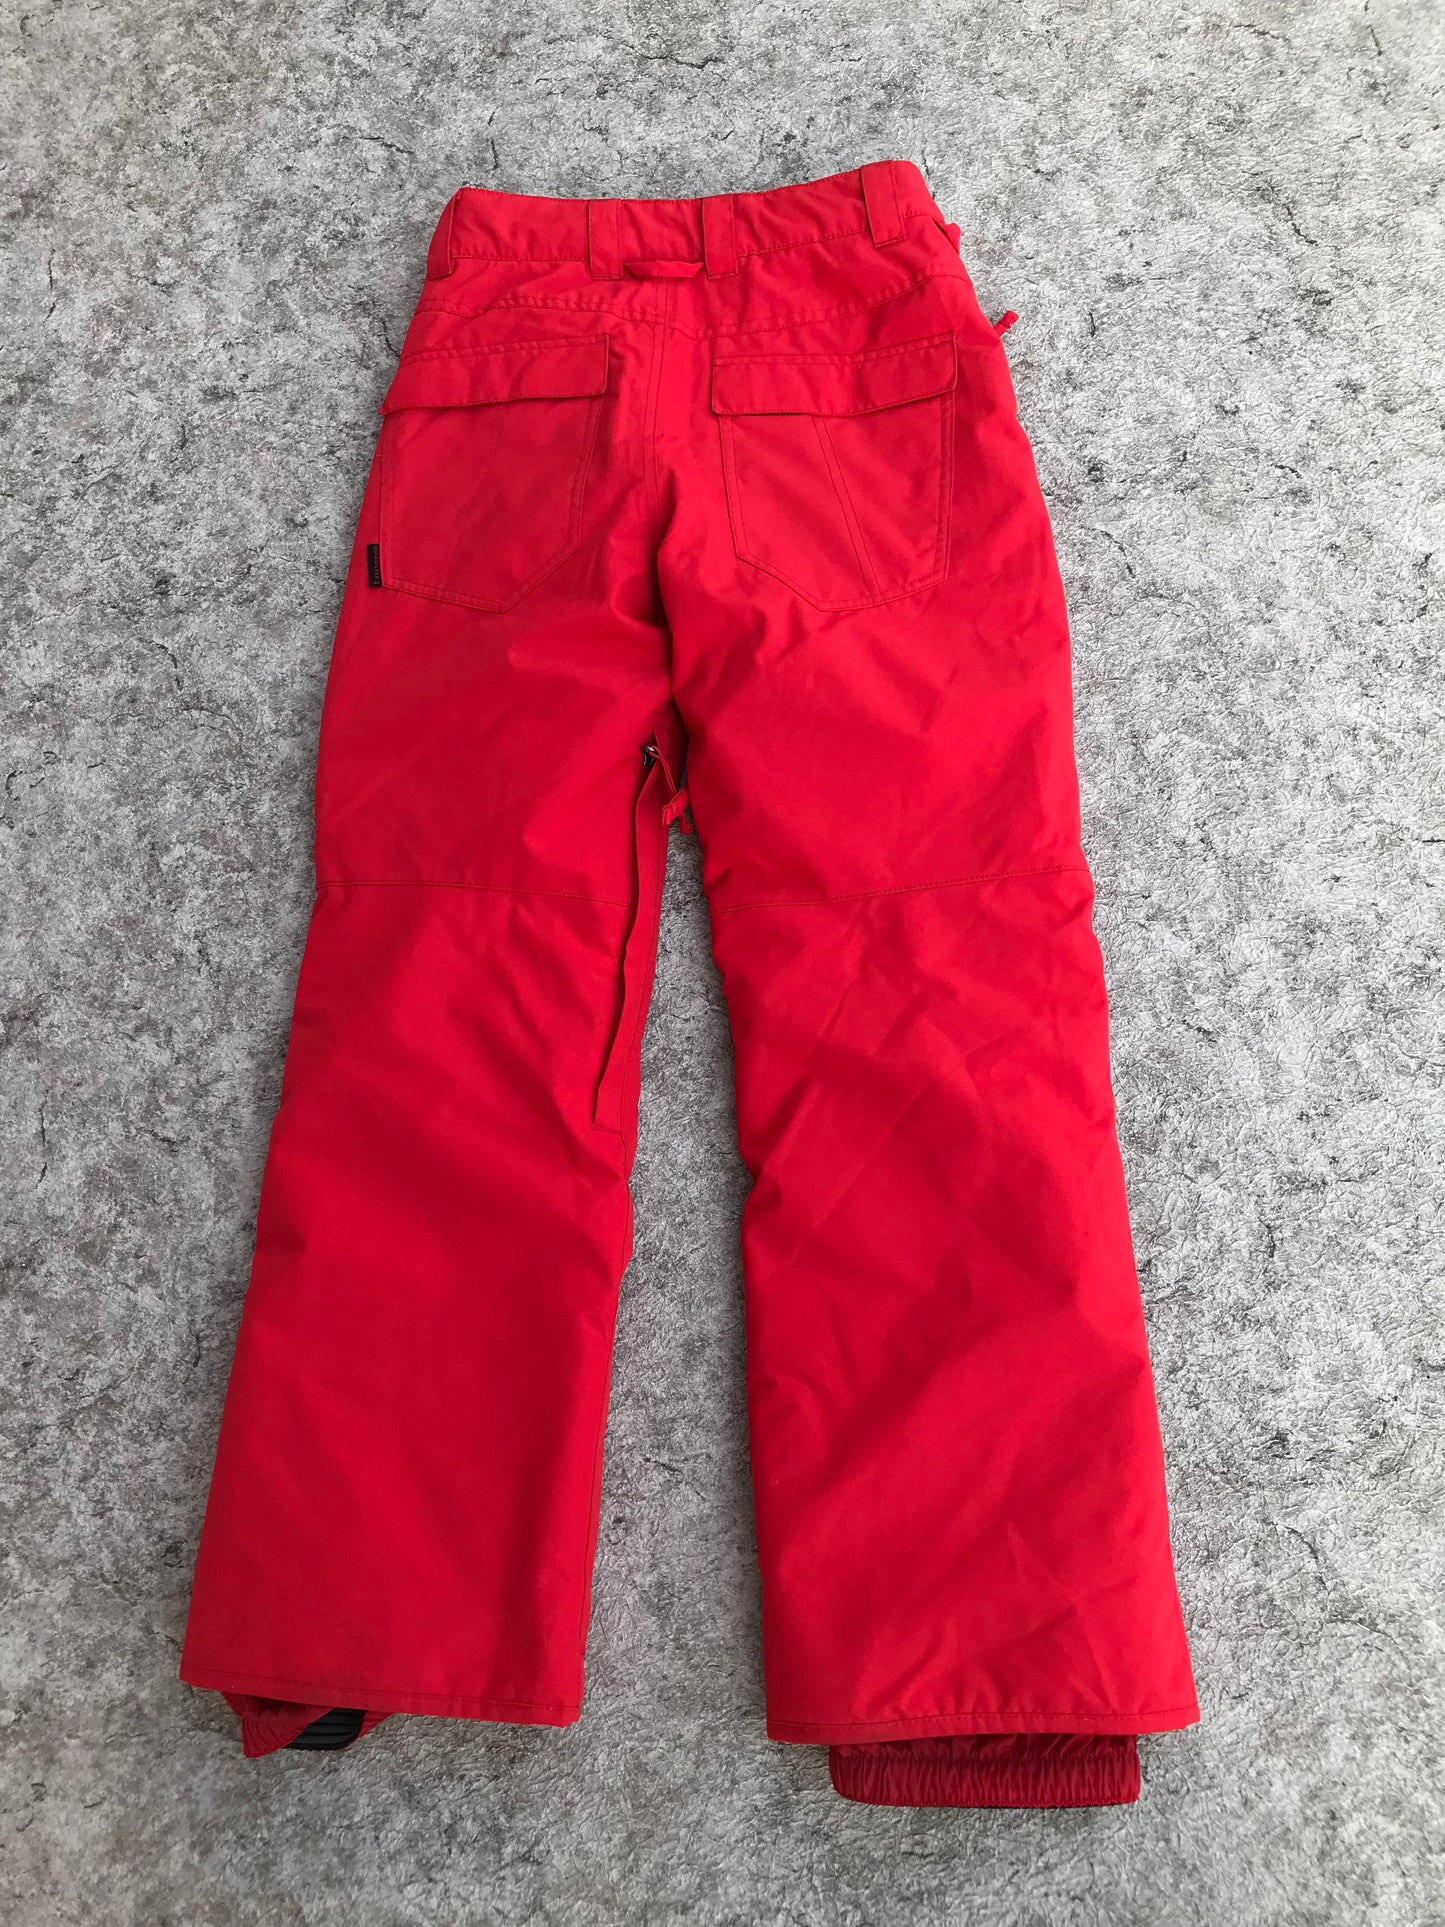 Snow Pants Child Size 12 Quicksilver Snowboarding Flat Brick Red As New